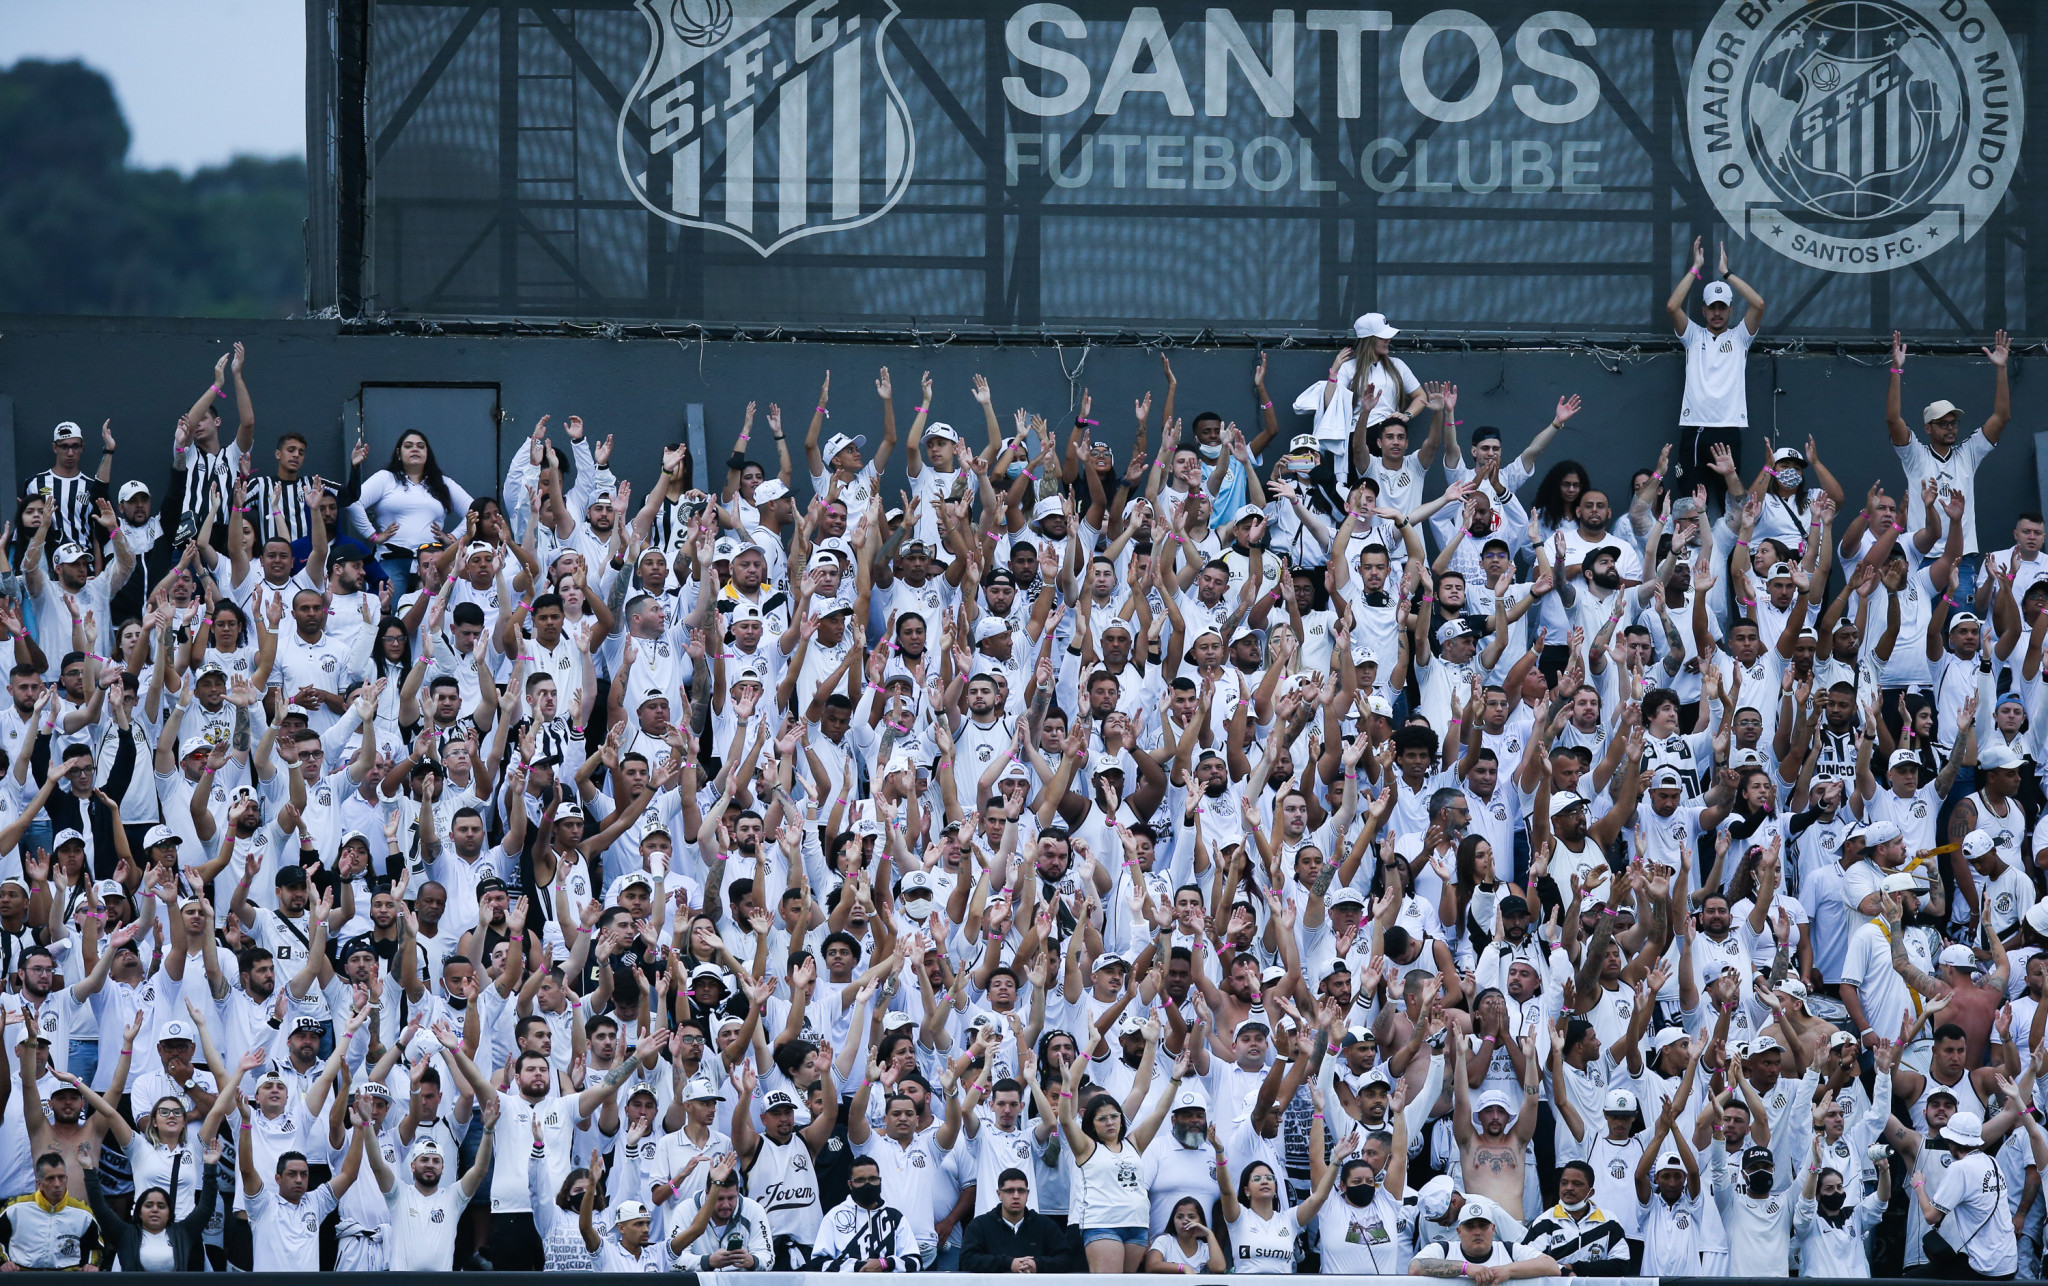 Supporters returned to the Estádio Urbano Caldeira for Santos' win against Grêmio, but were required to show proof of vaccination or a negative PCR test to enter ©Getty Images